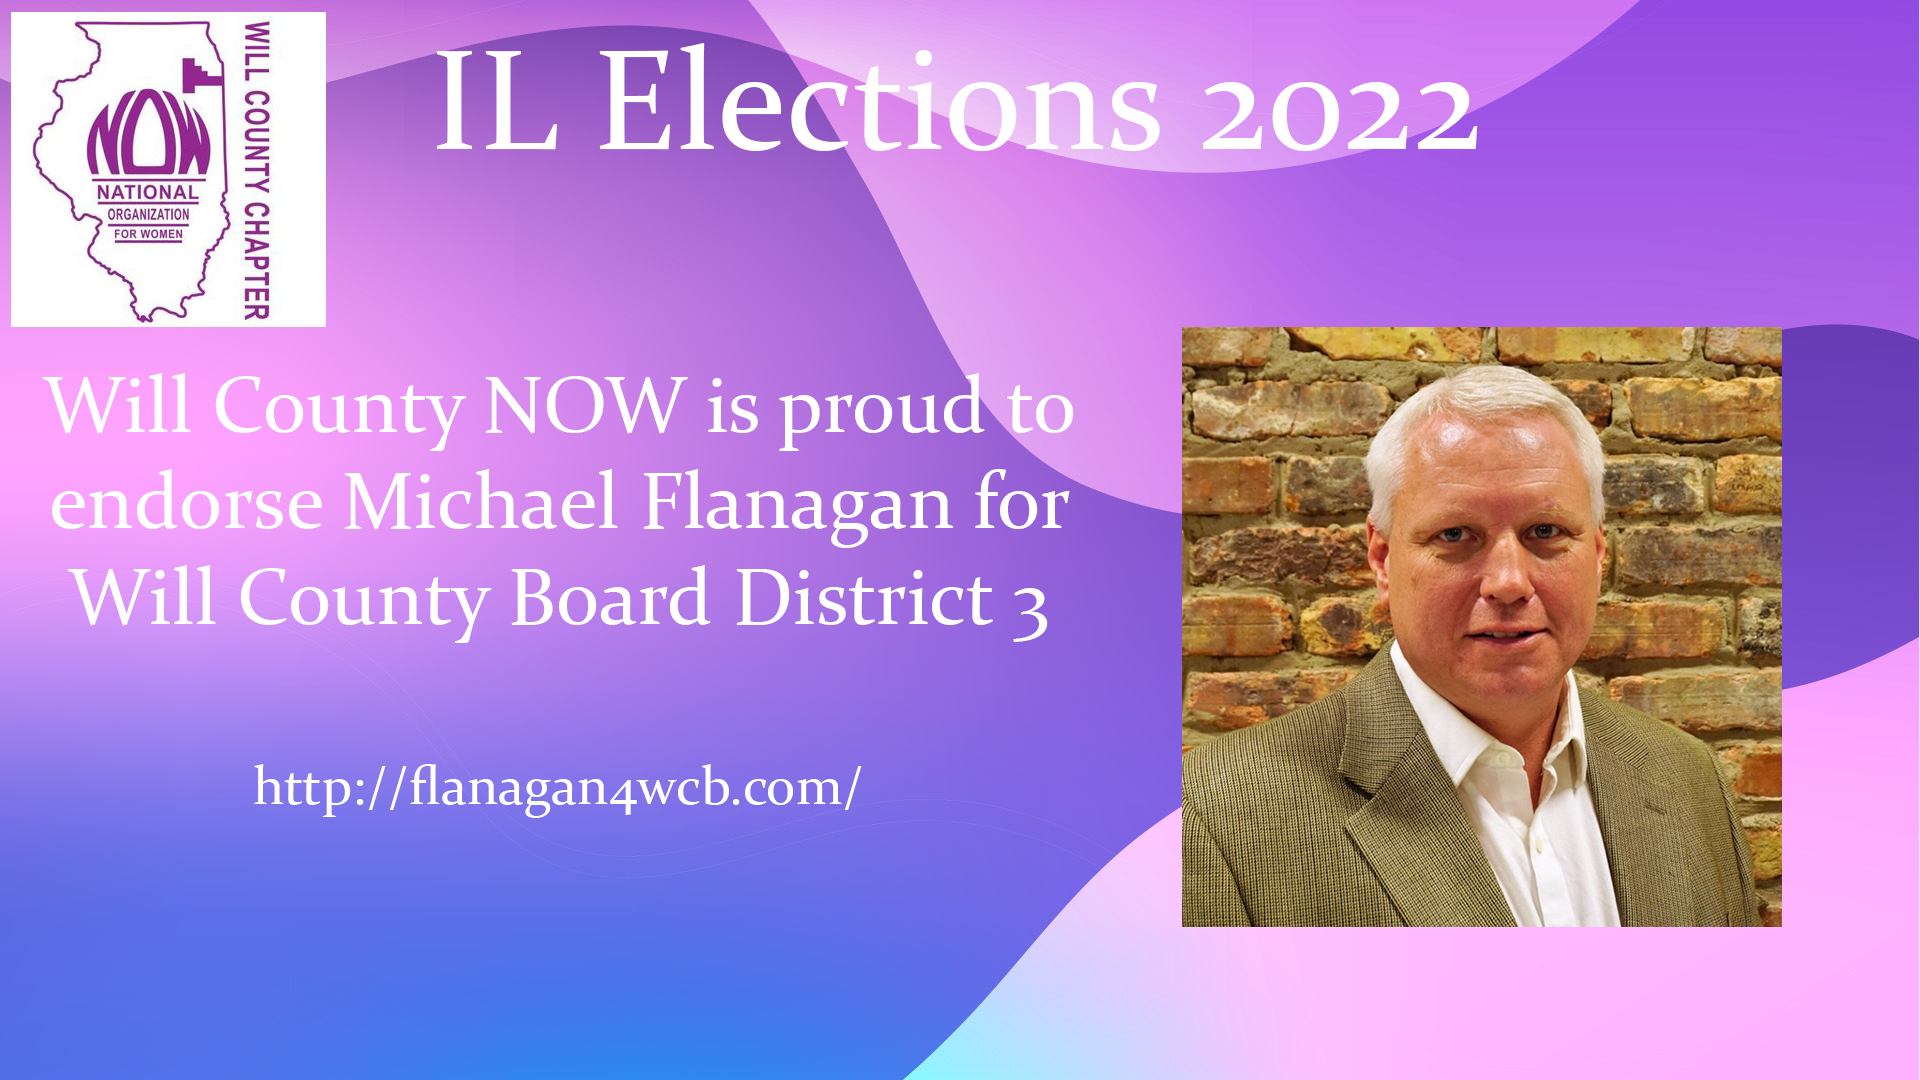 Will County NOW Endorses Michael Flanagan for Will County Board District 3